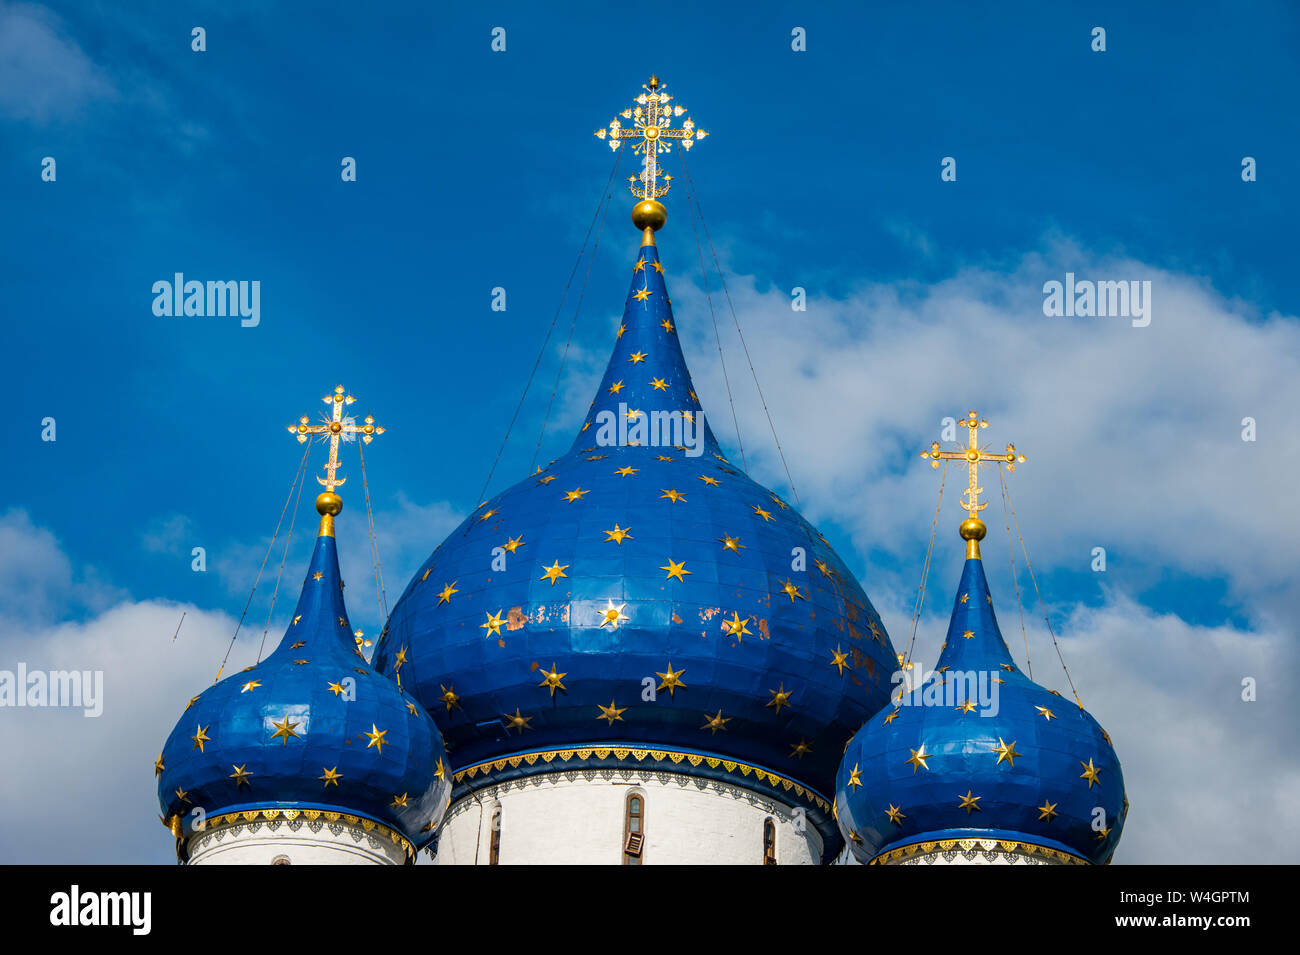 Nativity of the virgin cathedral, Suzdal, Golden ring, Russia Stock Photo